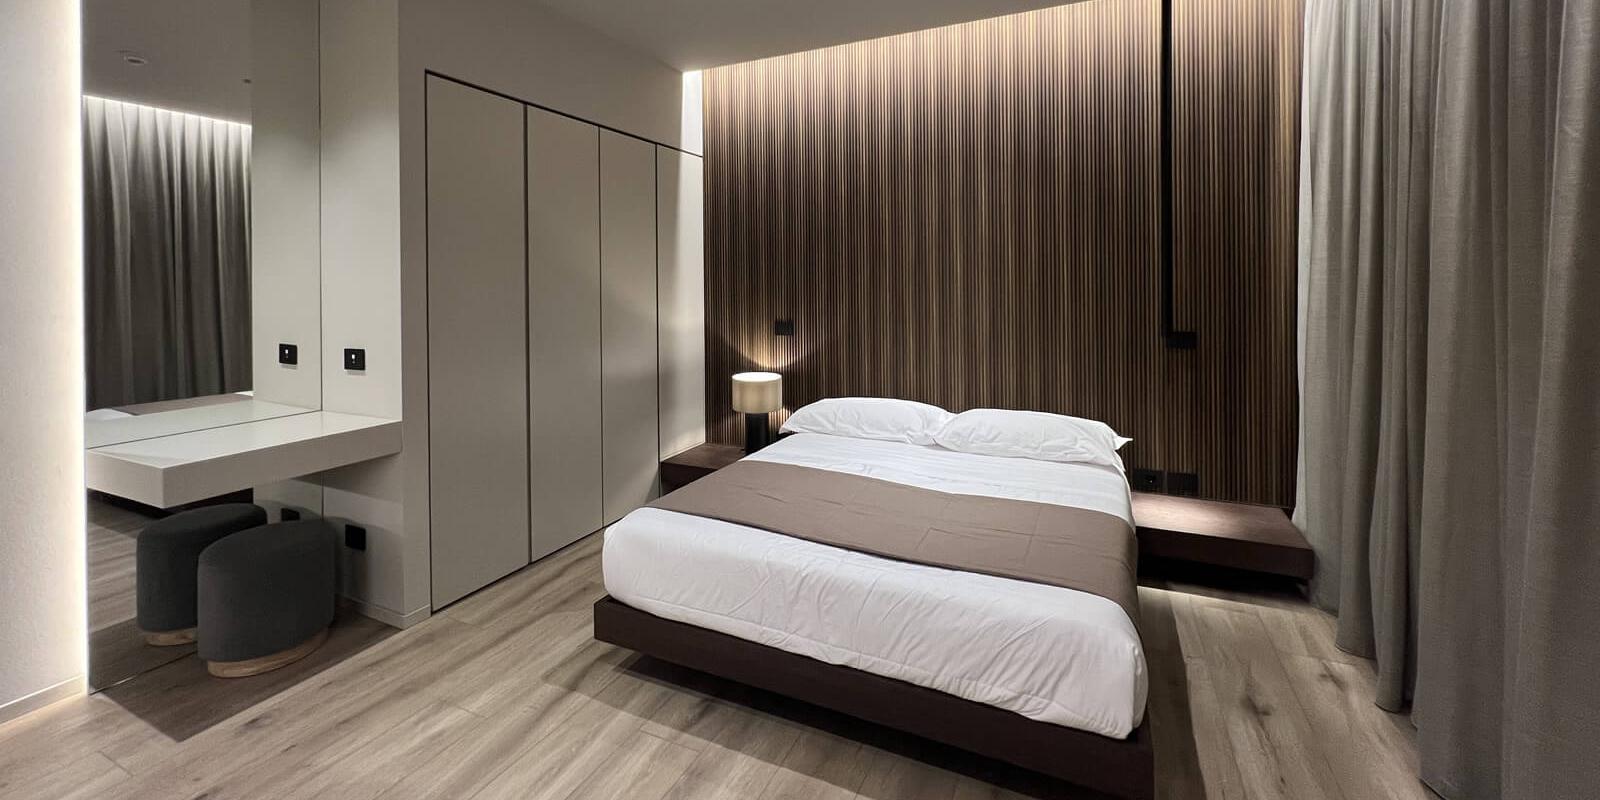 Modern room with double bed, wooden walls, and parquet flooring.